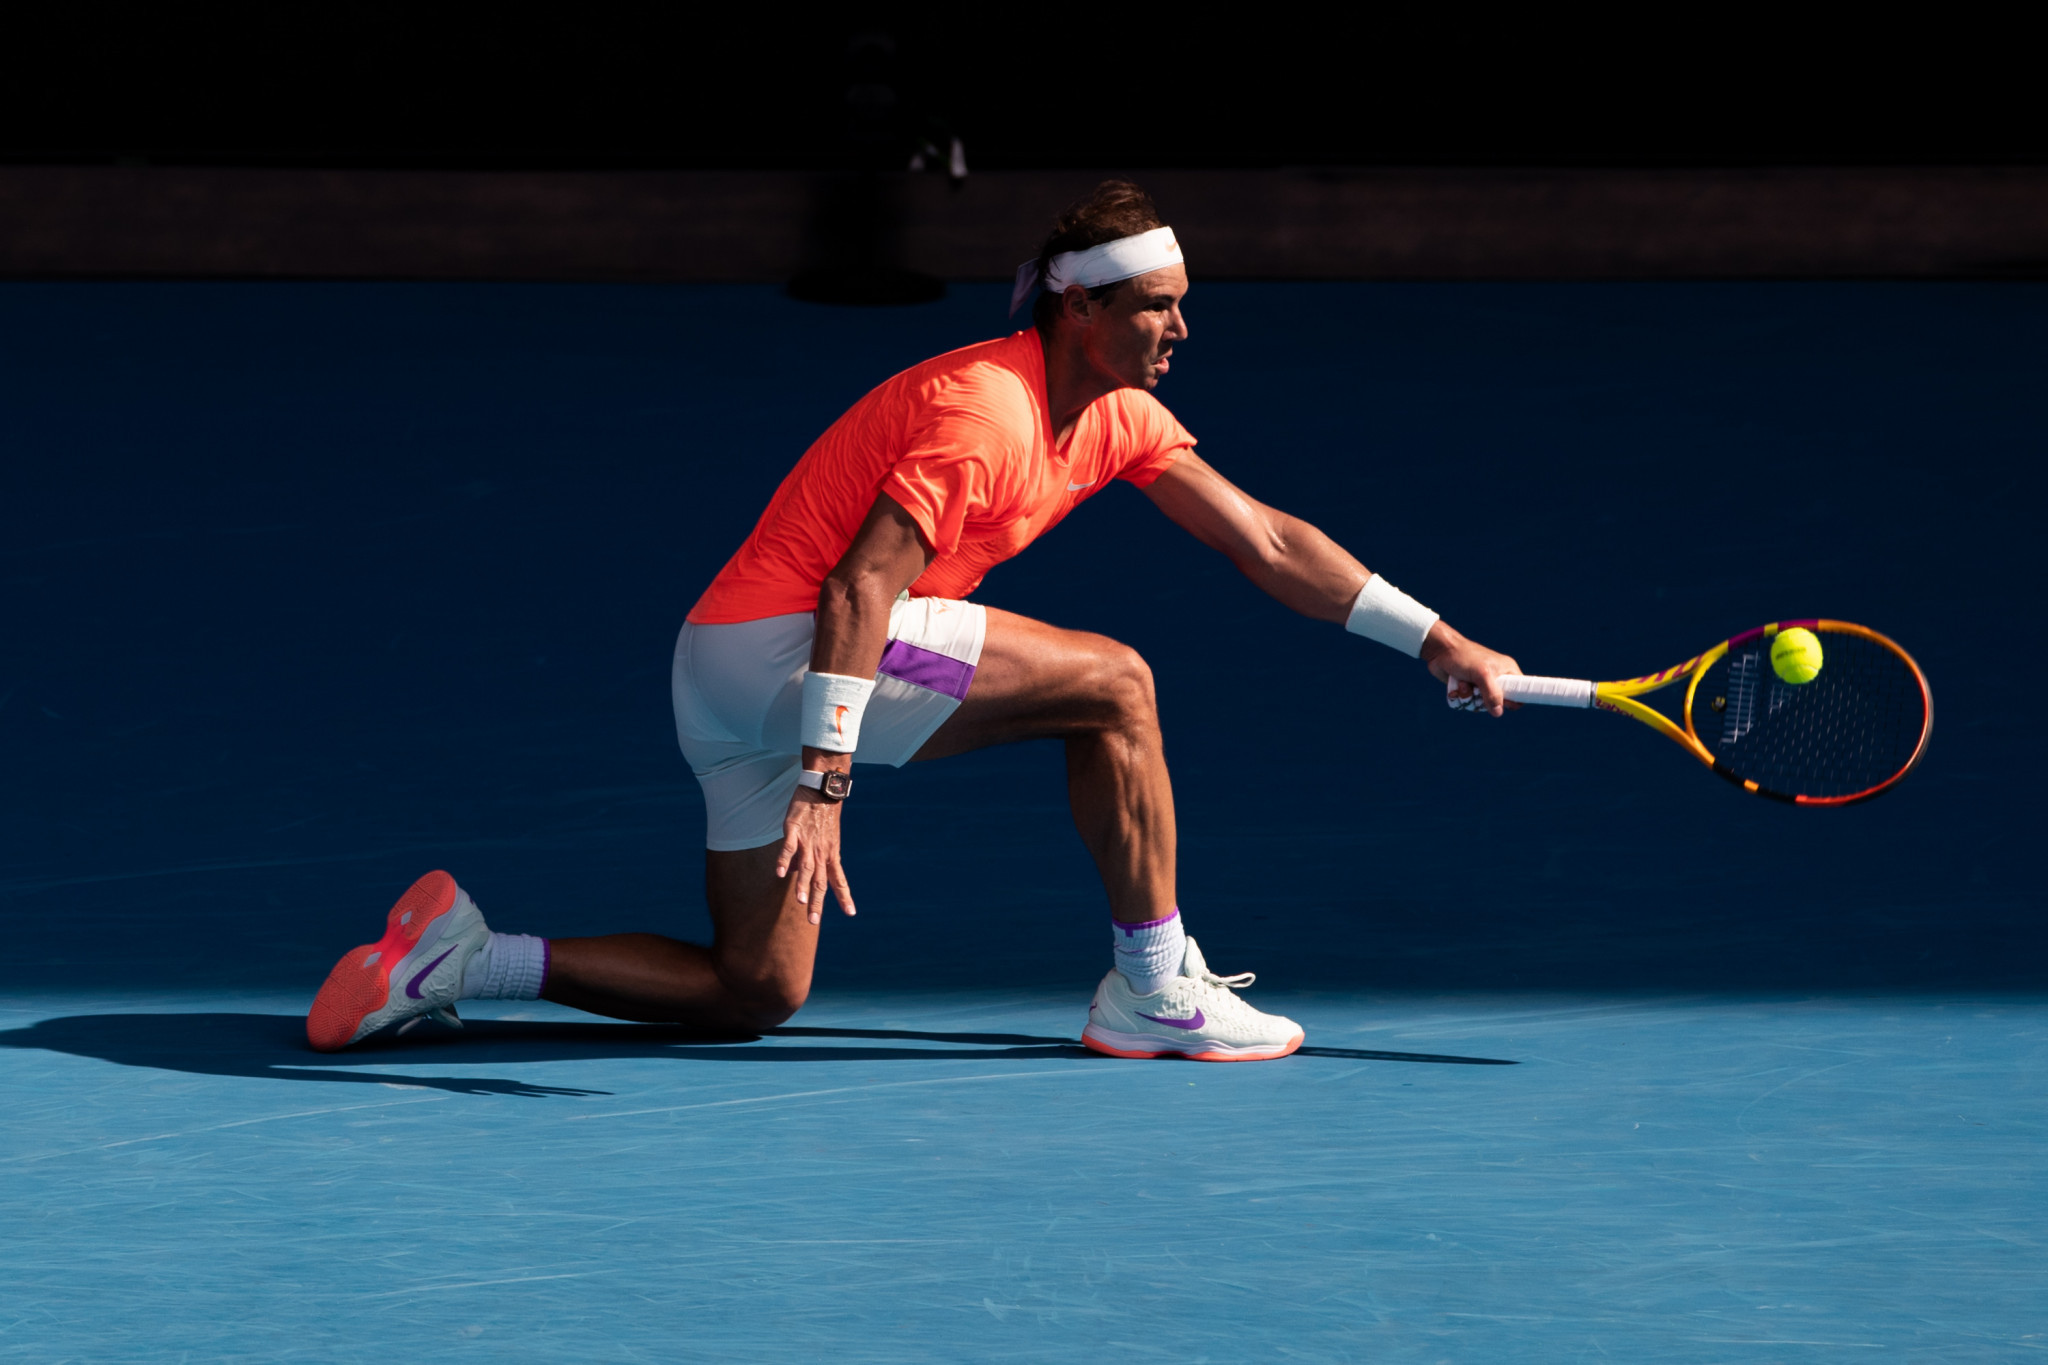 Rafael Nadal progressed to his 43rd Grand Slam quarter-final at the Australian Open ©Getty Images